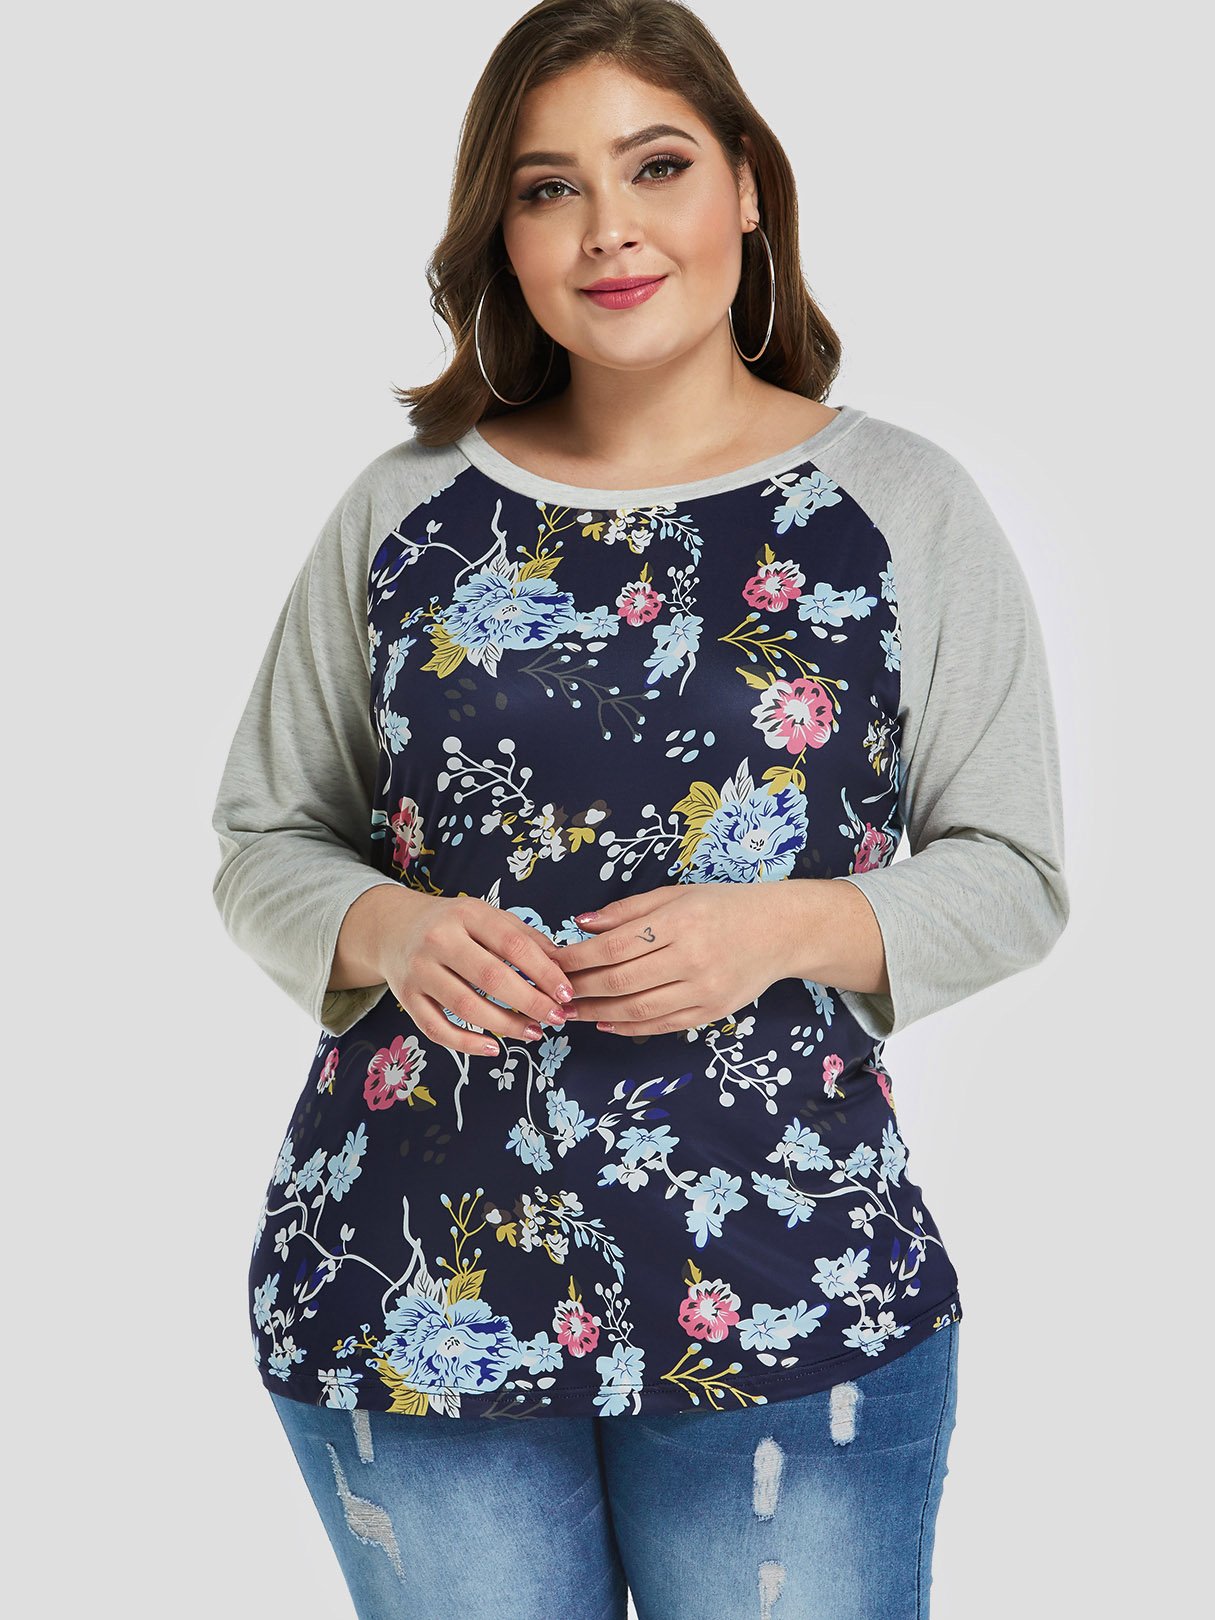 Wholesale Round Neck Floral Print 3/4 Sleeve Curved Hem Grey Plus Size Tops